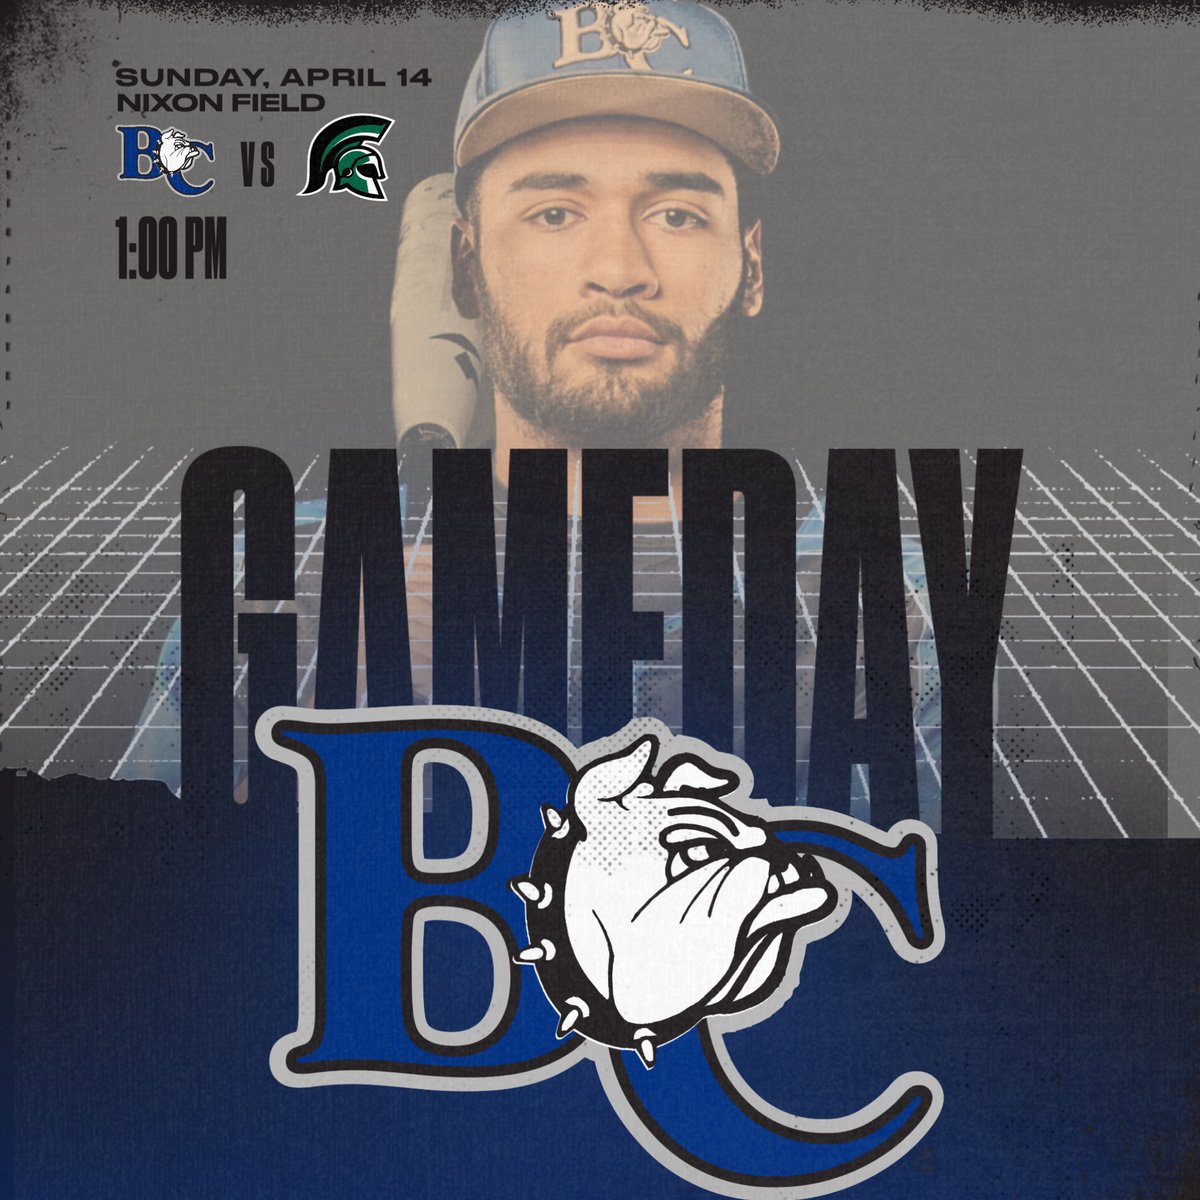 🚨GAMEDAY🚨 We look to end Alumni Weekend on a positive as we take on UMO for Game 3 of the series! PACK THE STANDS WITH BLUE 🔵🔵🔵 #GoBulldogs 🆚 UMO 🕐 1:00 PM 📍 Wilson, NC 🎥 conferencecarolinasdn.com/barton/